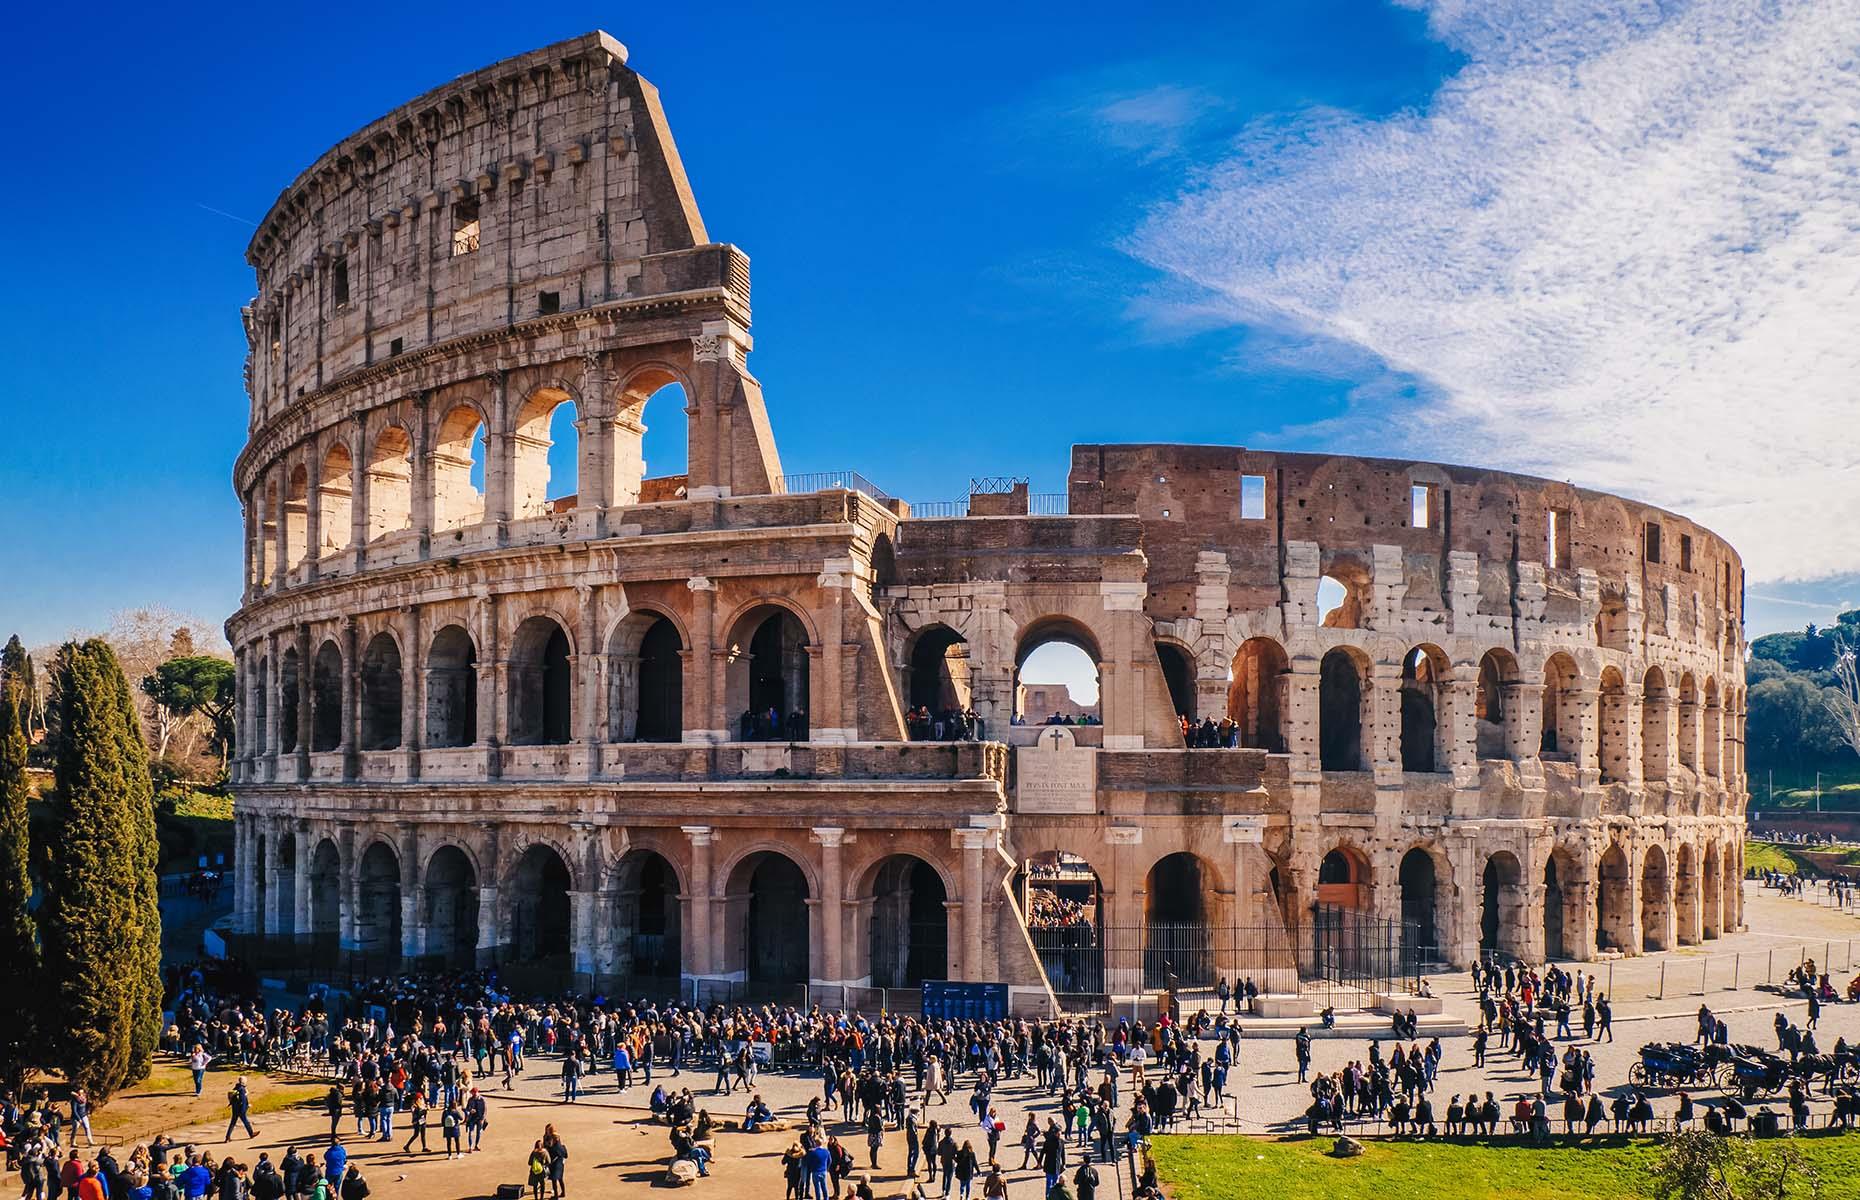 <p>Built between AD 70-72, the Colosseum is still the largest amphitheater in the world nearly 2,000 years later. Here, over four levels reaching 157ft high (47.85m), 50,000 Ancient Romans would cheer on gladiators, who often fought to the death. The remains of the hypogeum, where gladiators and wild animals waited before coming up into the arena to fight, can be seen clearly from viewing points. Despite damage from earthquakes, fire and lightning over the years, the Colosseum remains truly monumental, and a must-see on any visit to Rome. <strong>Score: 6.78</strong></p>  <p><a href="http://bit.ly/3roL4wv"><strong>Love this? Follow our Facebook page for more travel inspiration</strong></a></p>